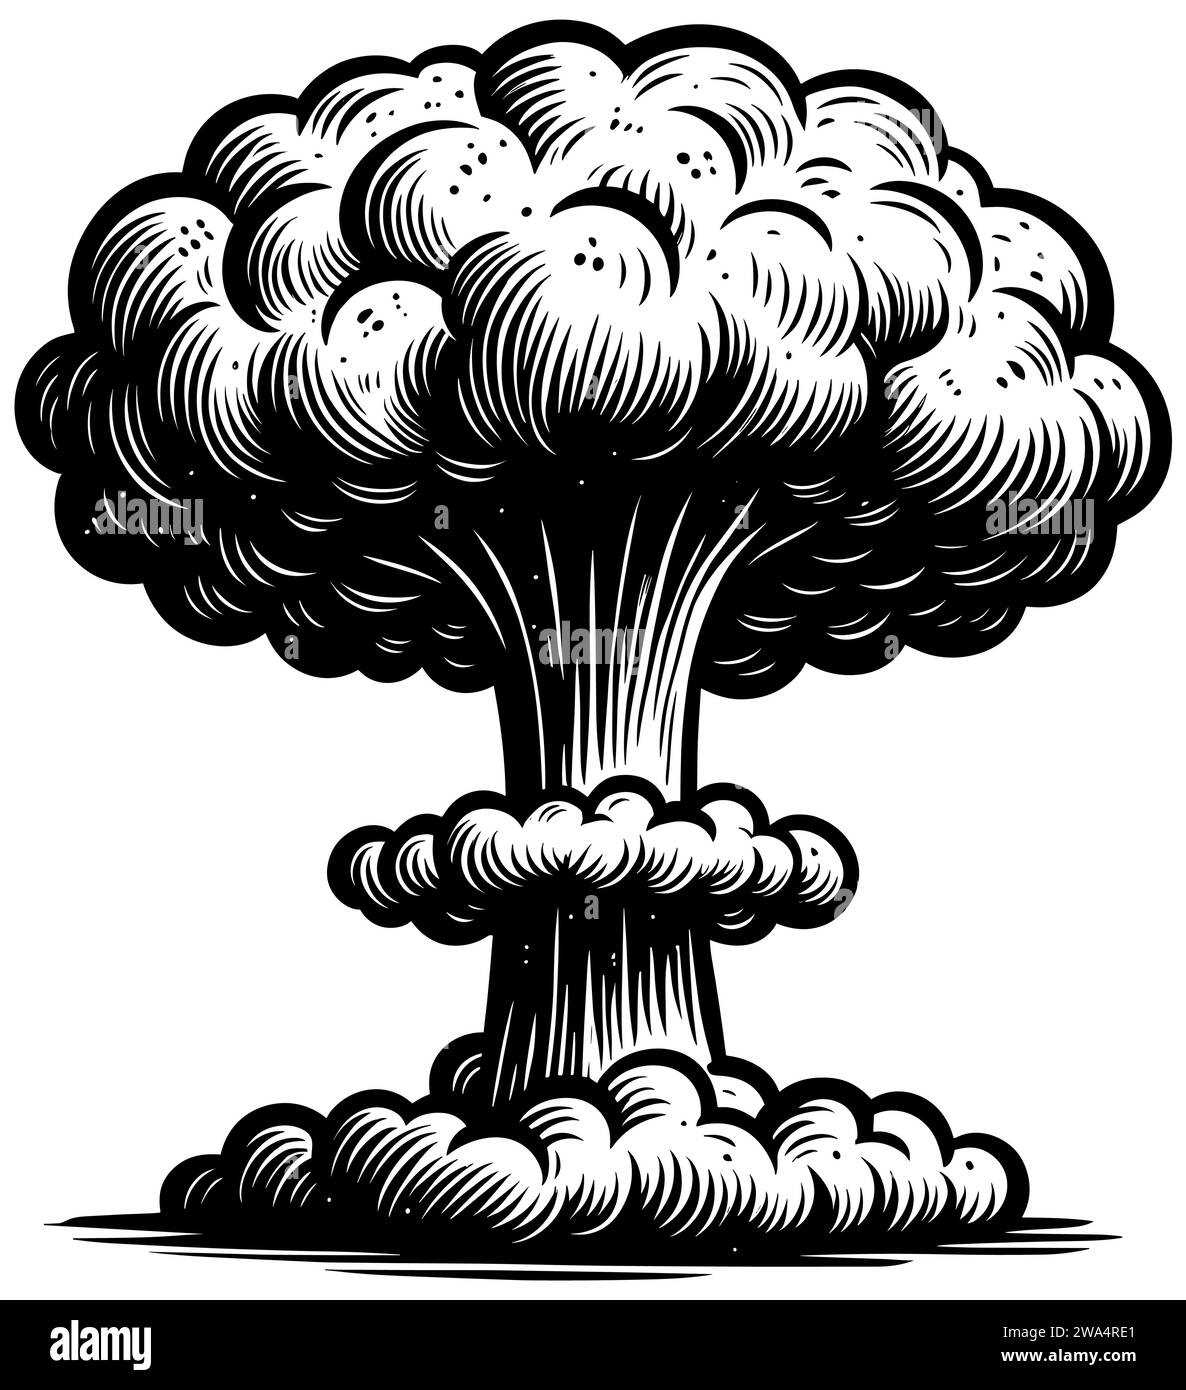 Nuclear explosion with mushroom cloud in woodcut style. Stock Vector